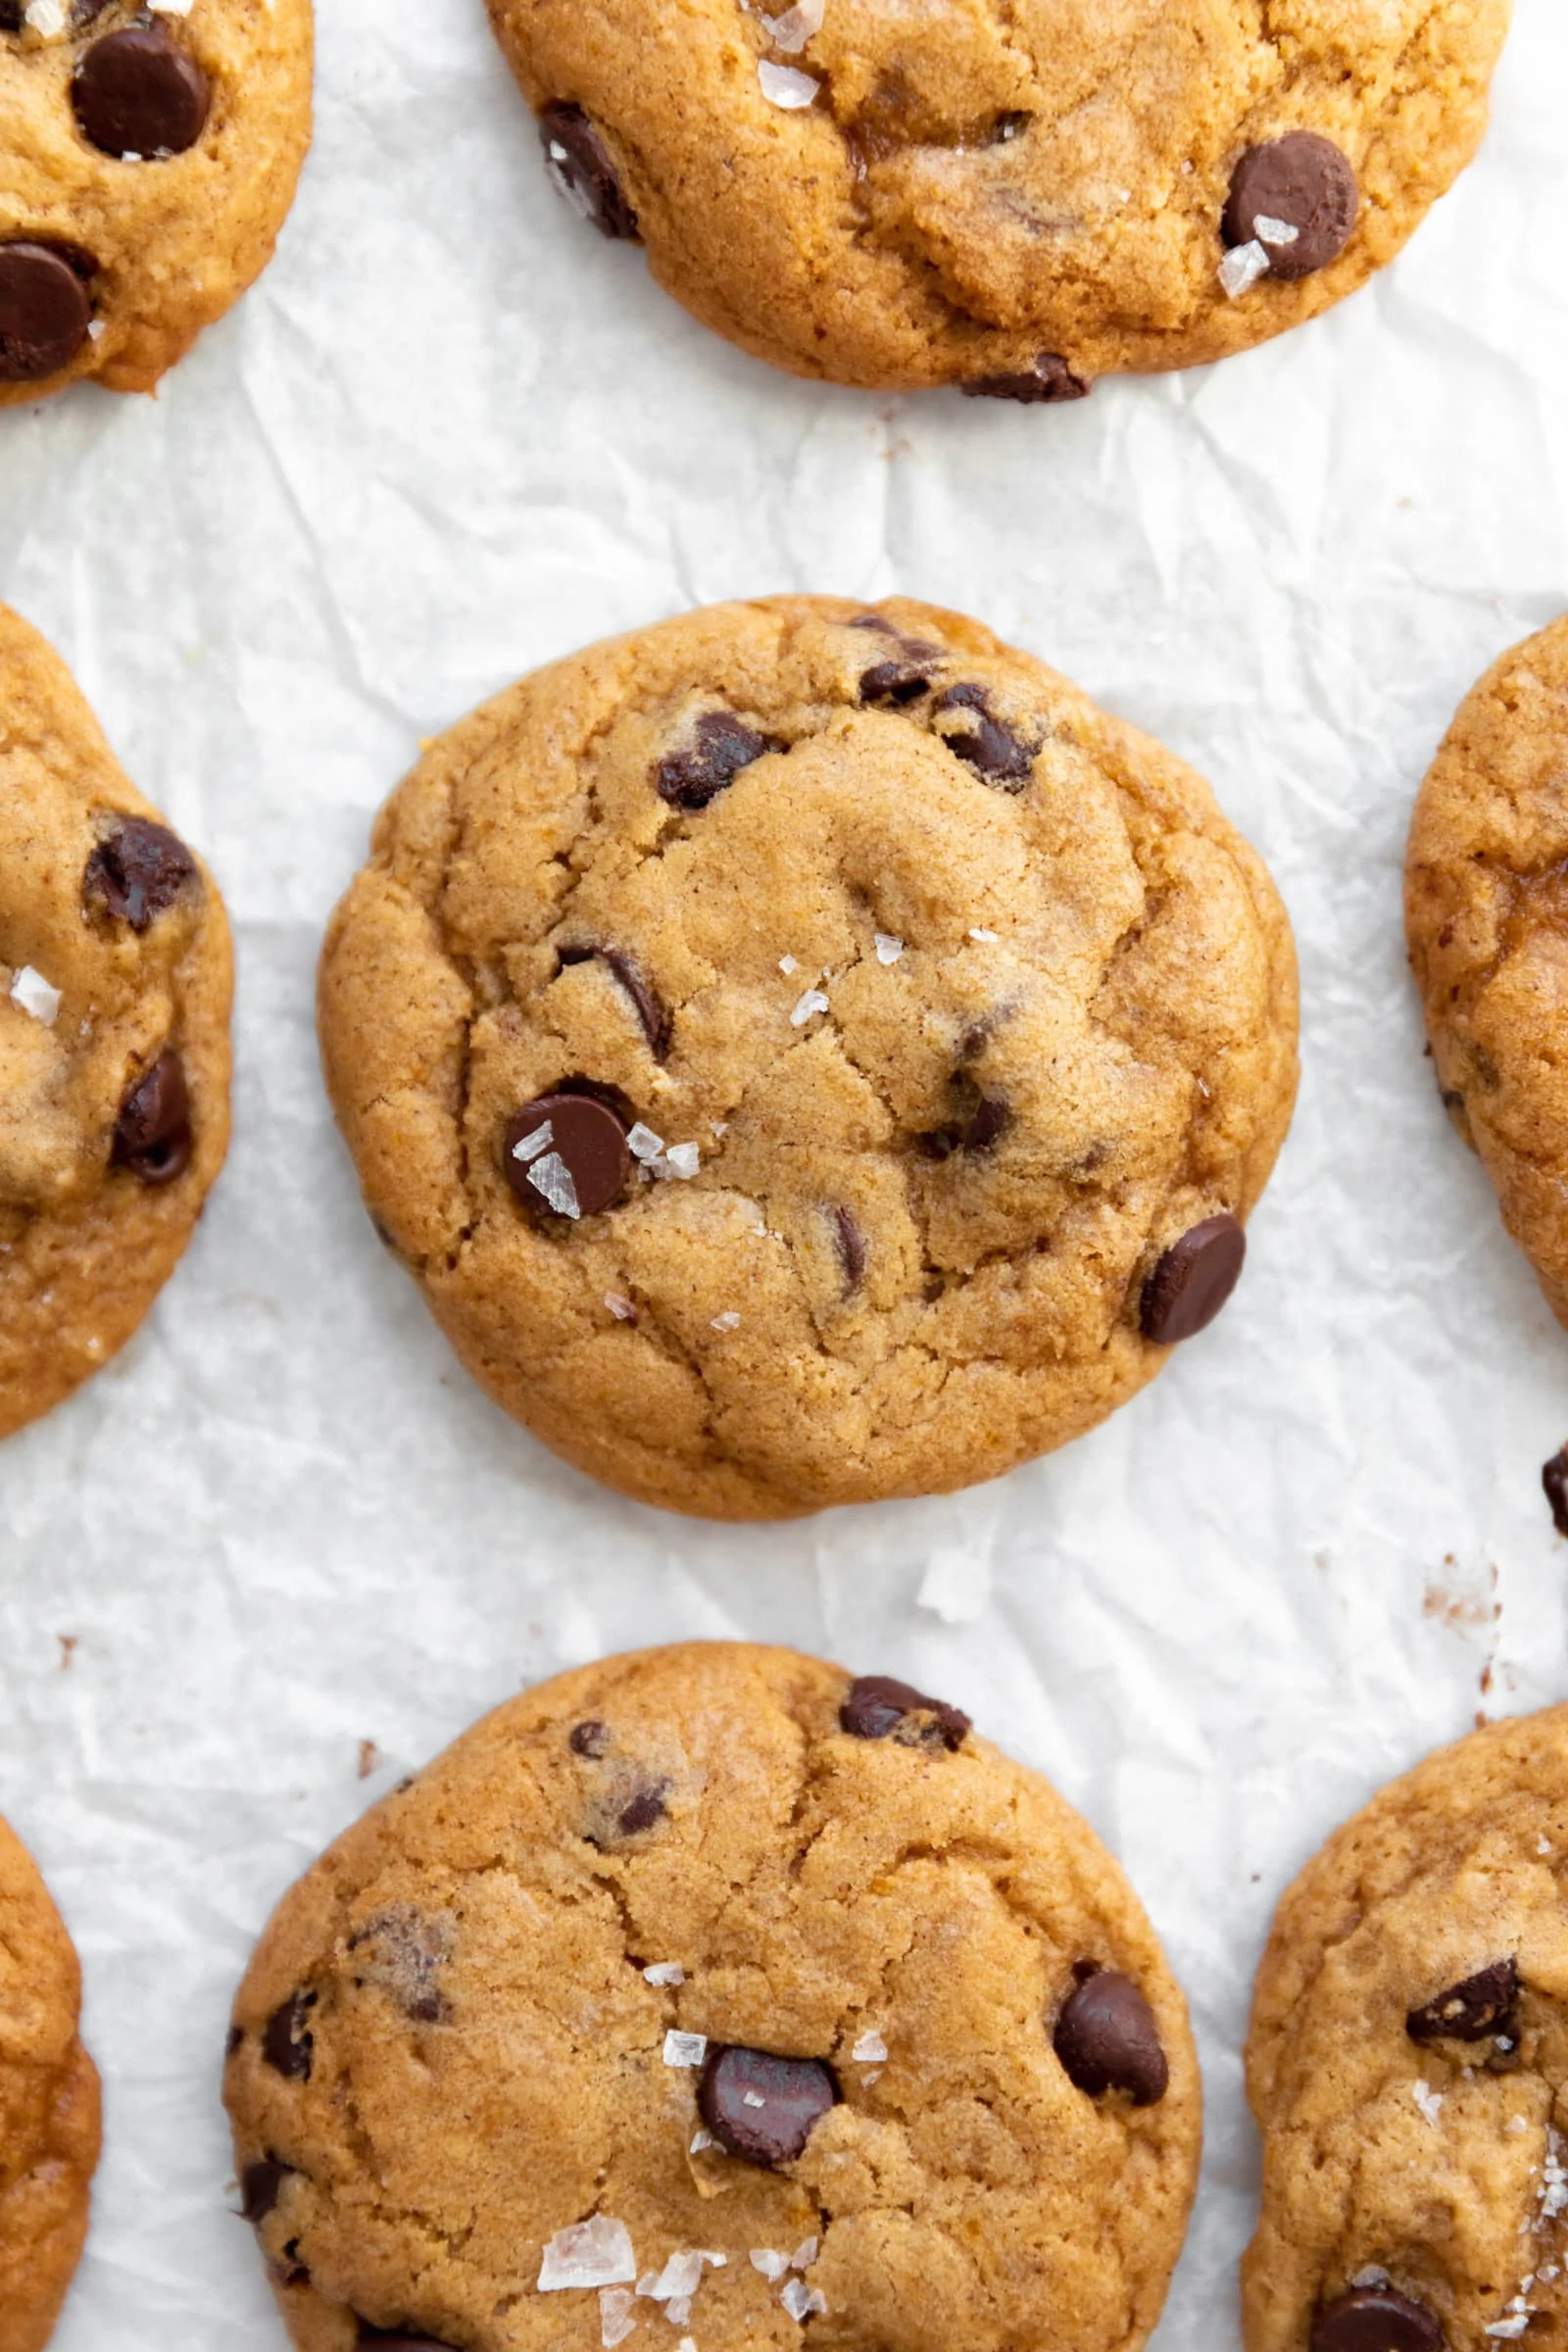 chewy pumpkin chocolate chip cookies